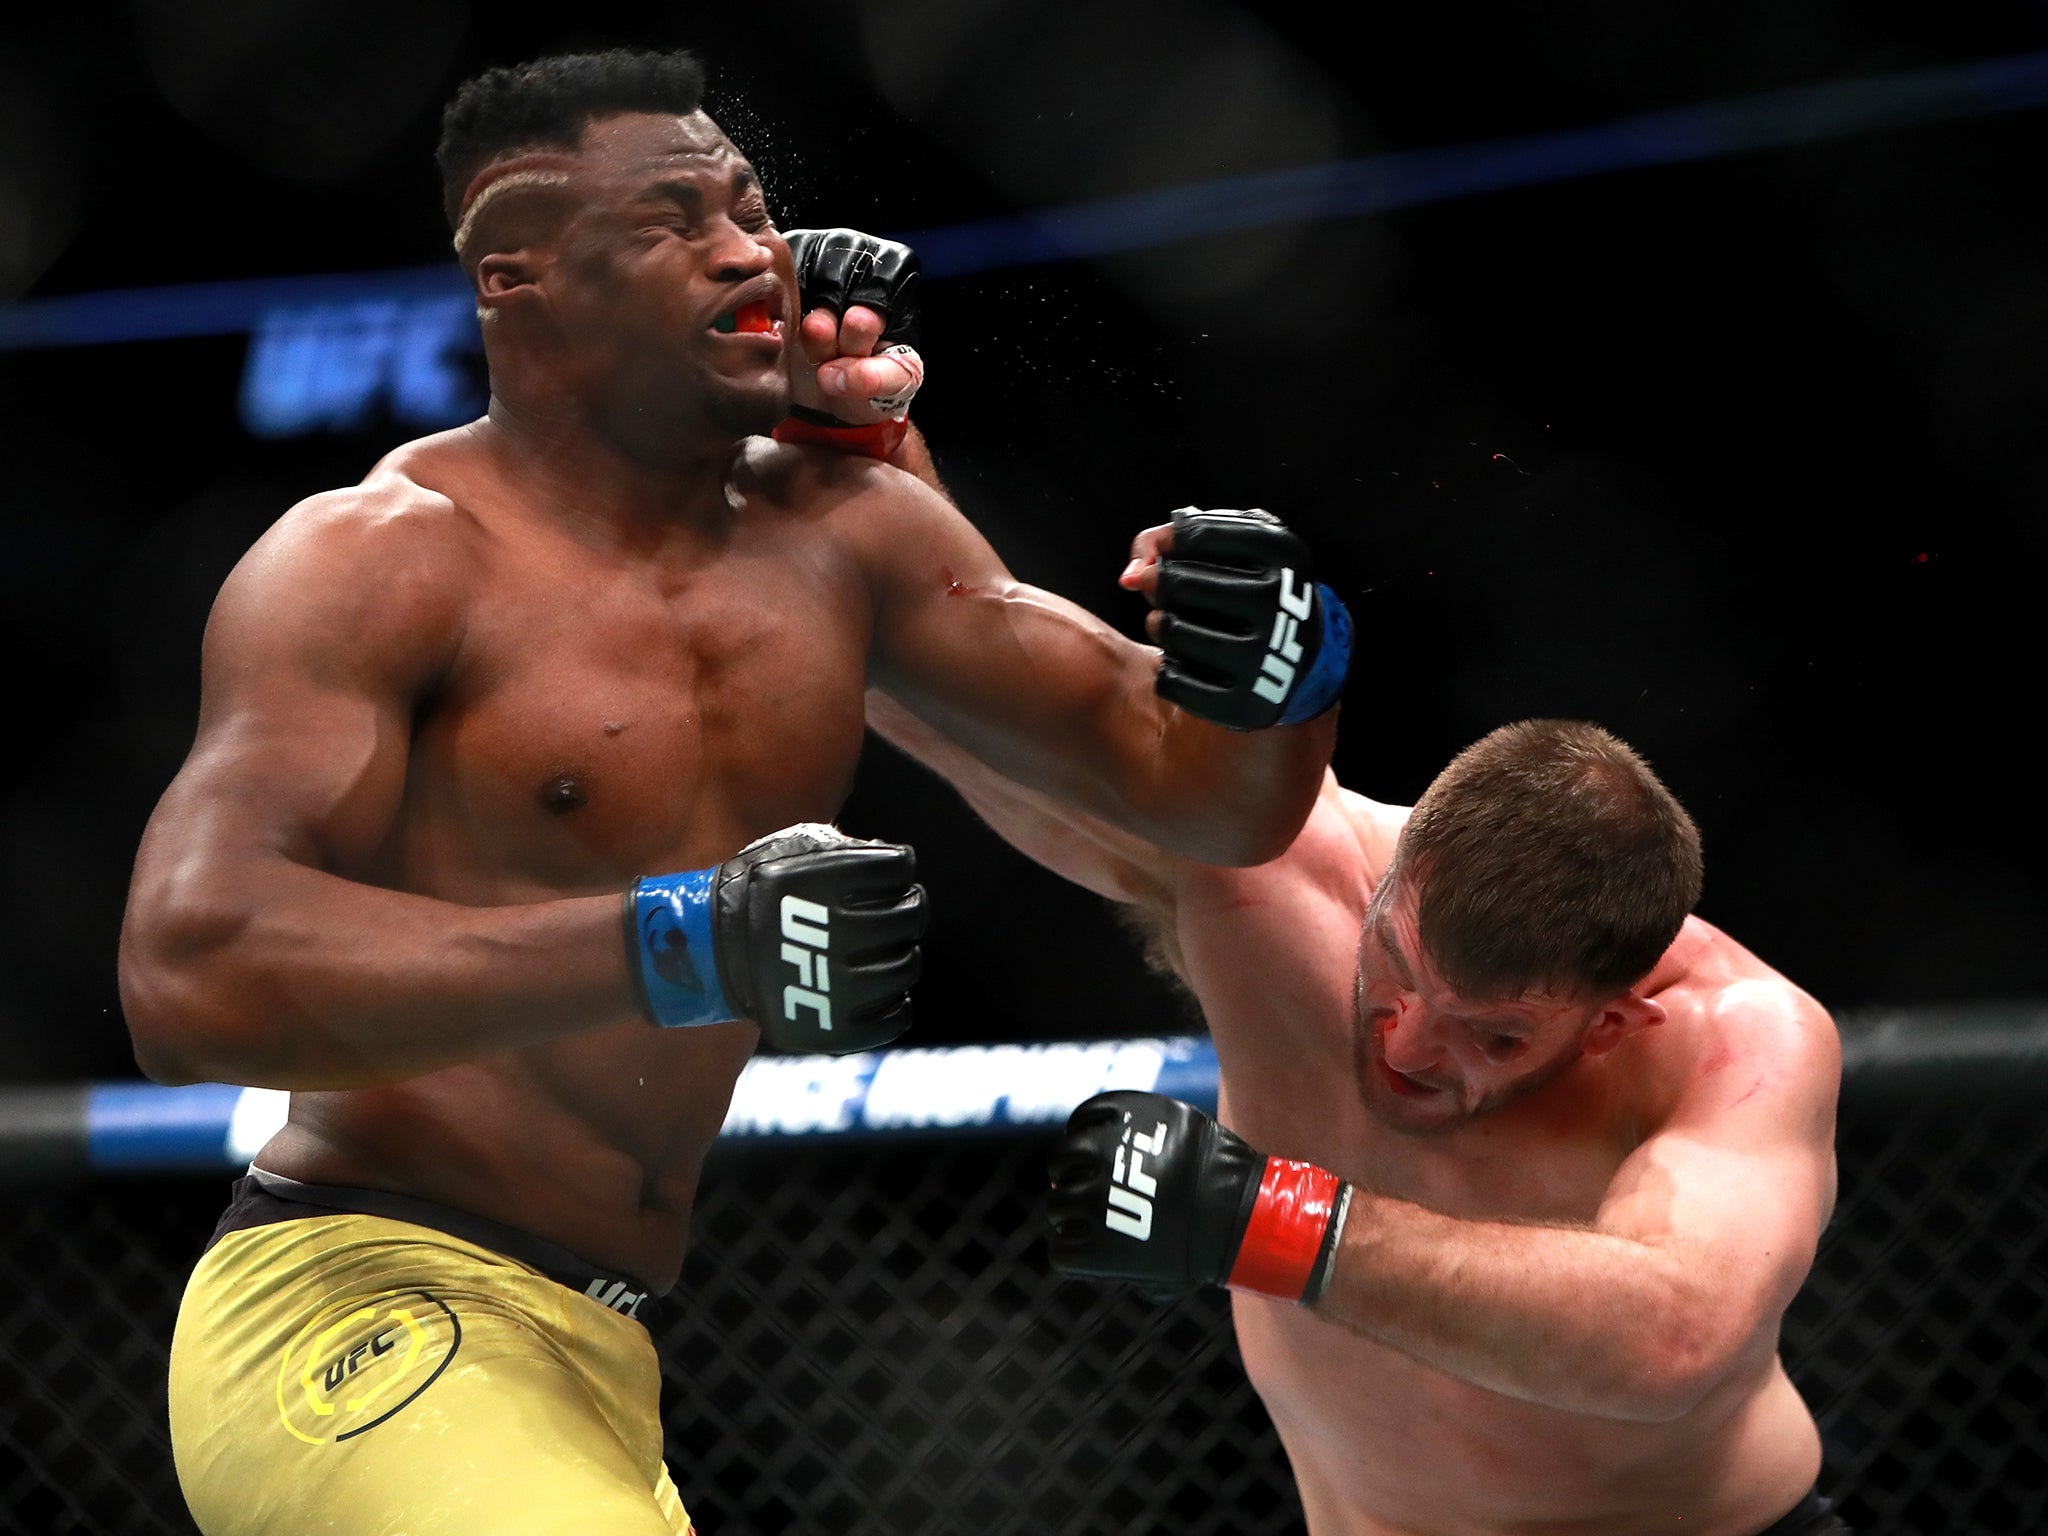 Stipe Miocic beat Francis Ngannou at UFC 220 in Boston with a comfortable unanimous decision victory